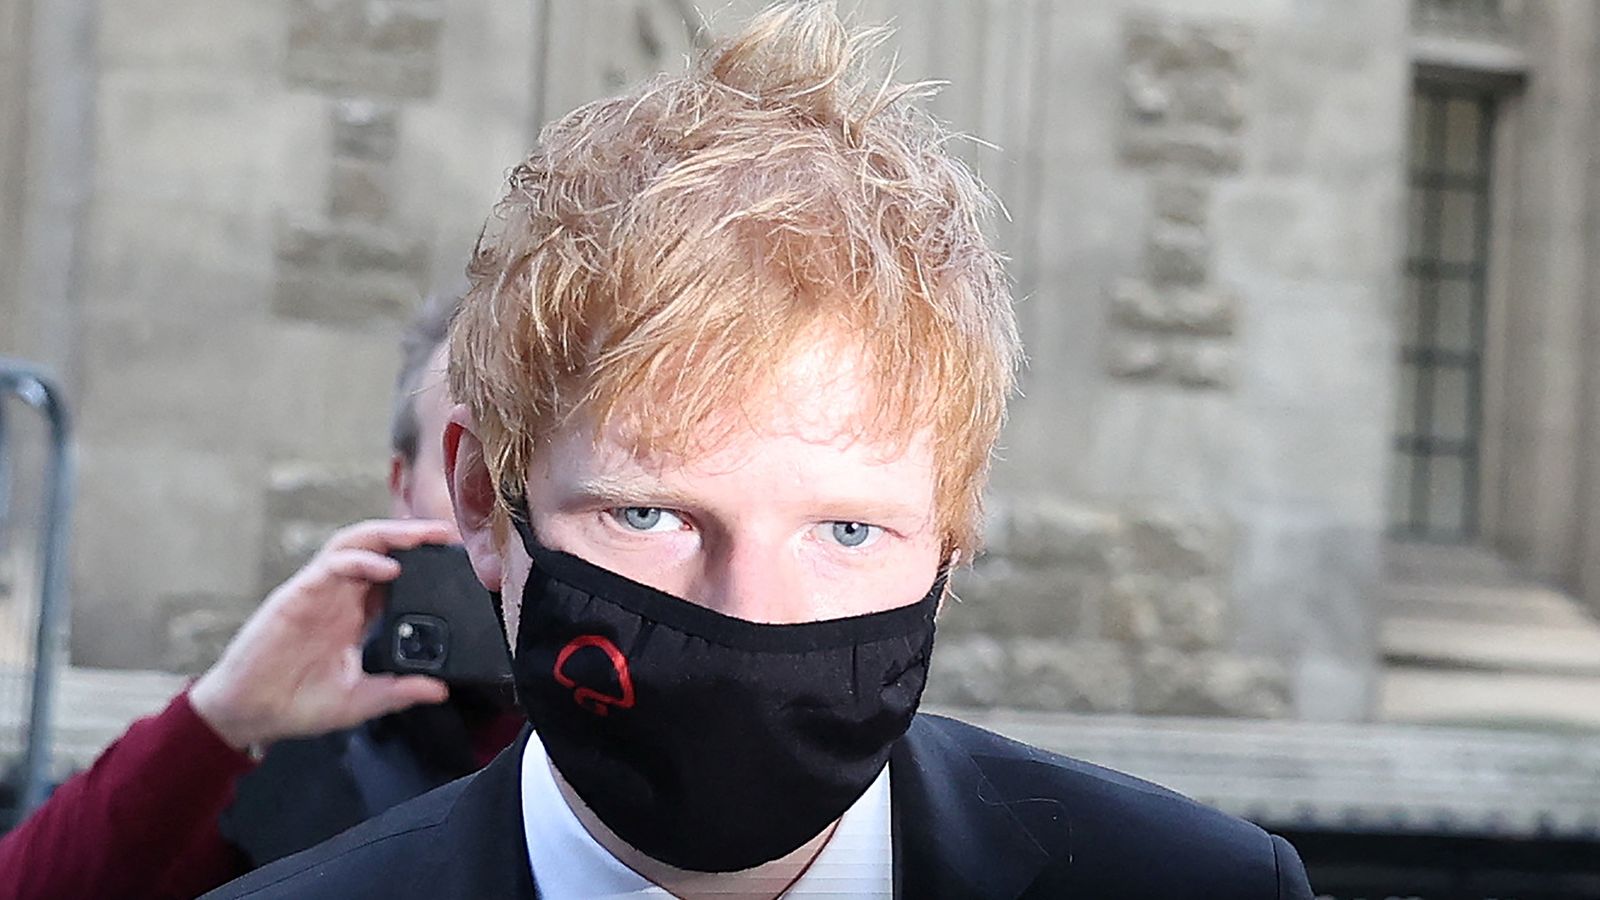 Sheeran, pictured during the trial, says 'baseless' copyright claims 'have to end'